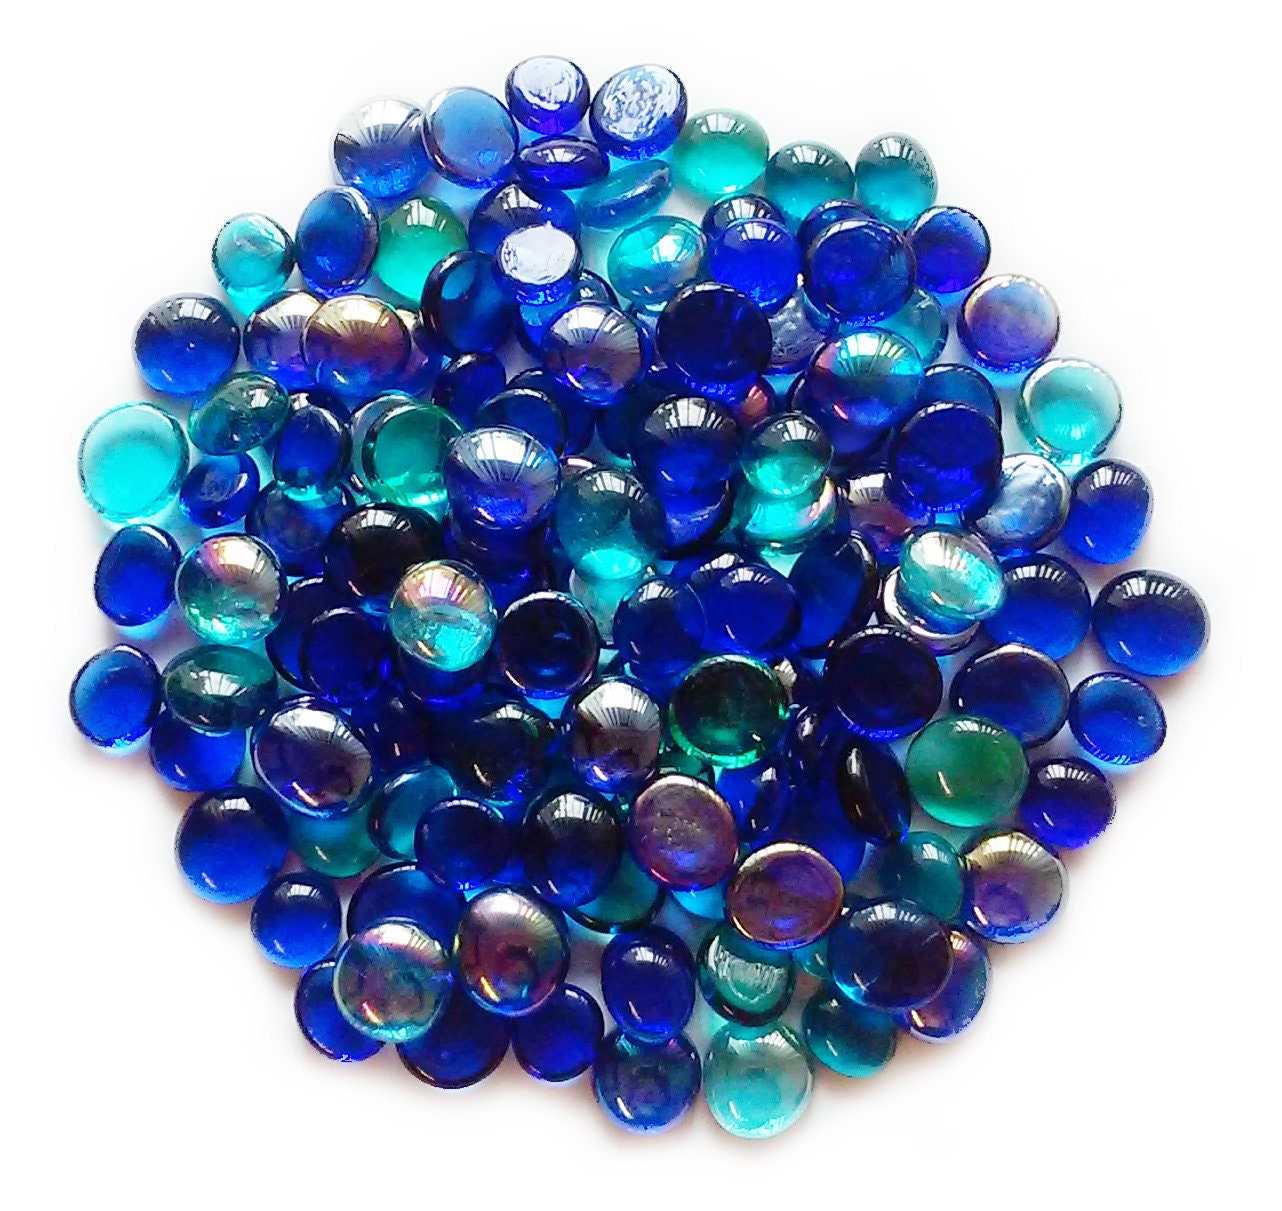 Mixed Color Glass Gems Pebbles Stones Flat Marbles for Vase Accents and  Crafting